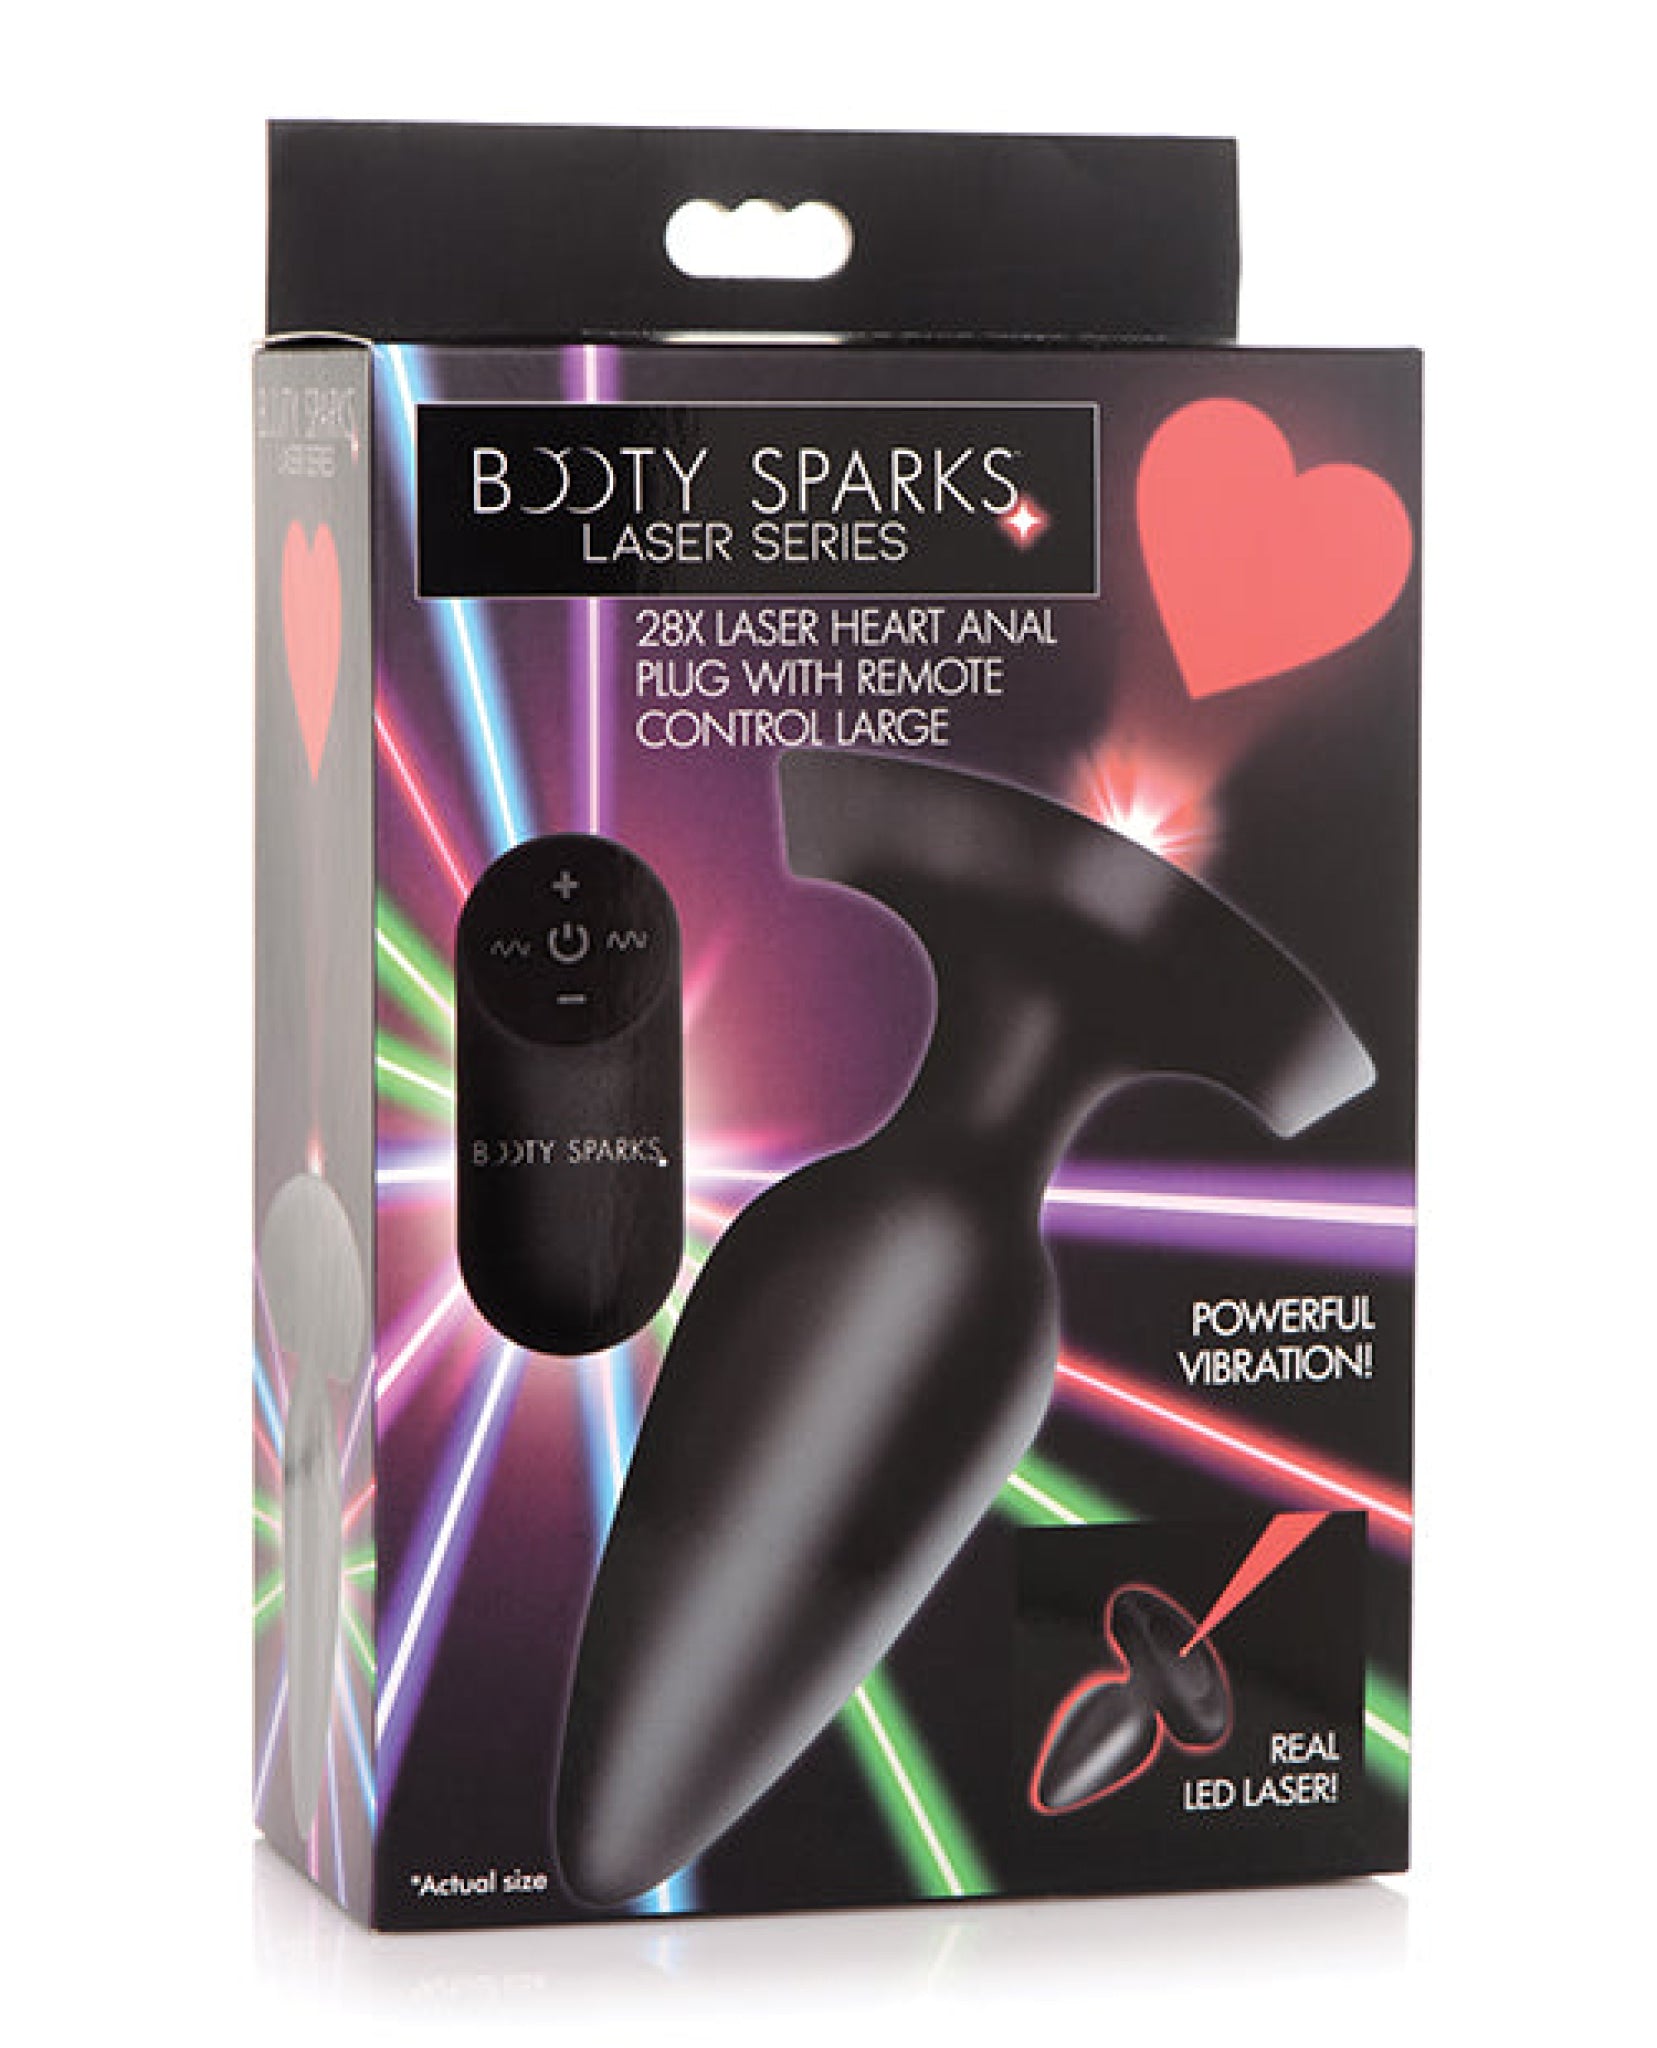 Booty Sparks Laser Heart Anal Plug W/remote Booty Sparks